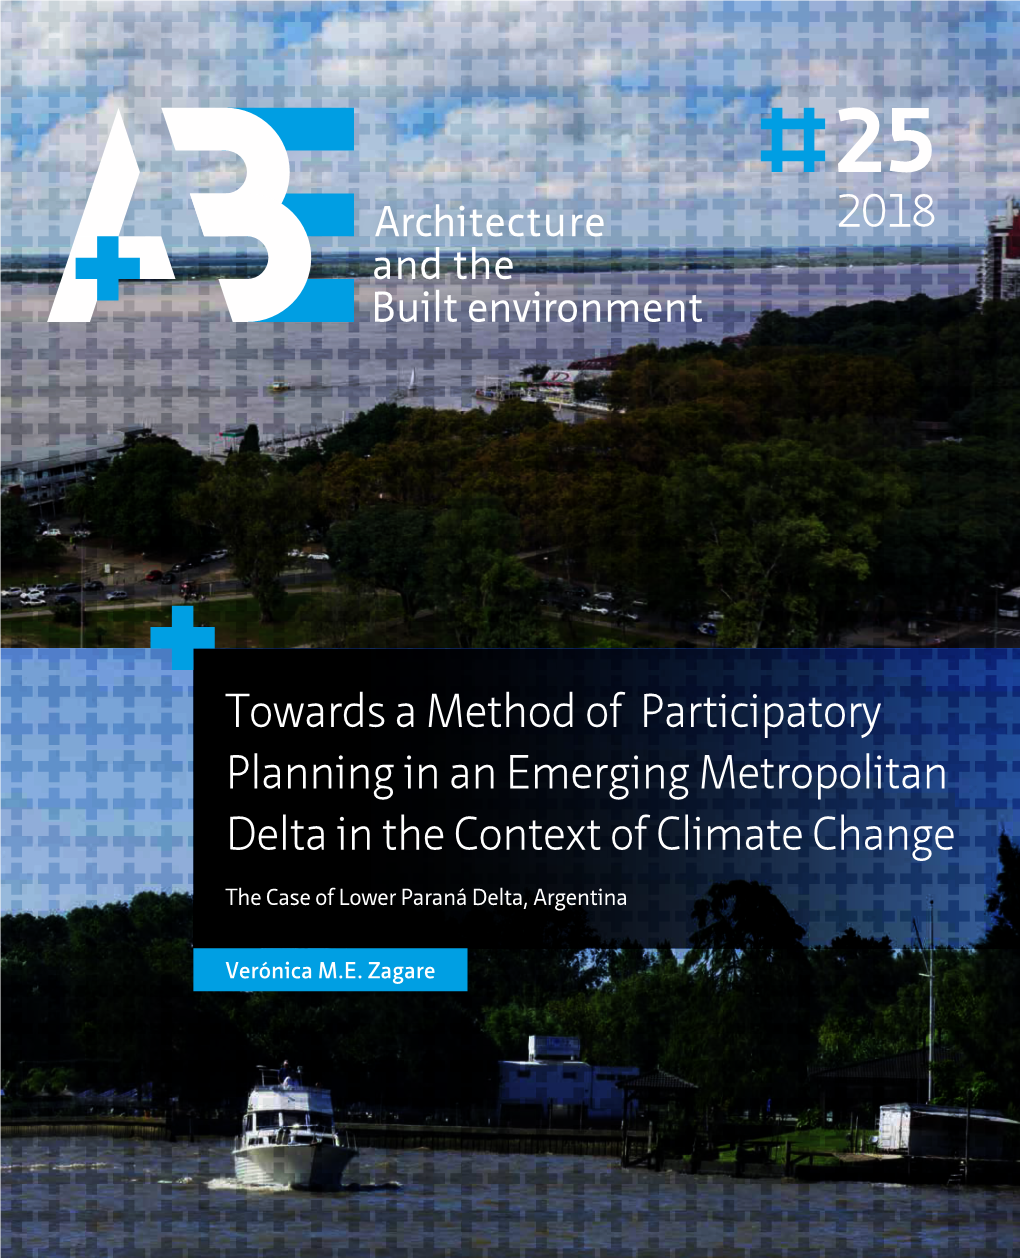 Towards a Method of Participatory Planning in an Emerging Metropolitan Delta in the Context of Climate Change the Case of Lower Paraná Delta, Argentina